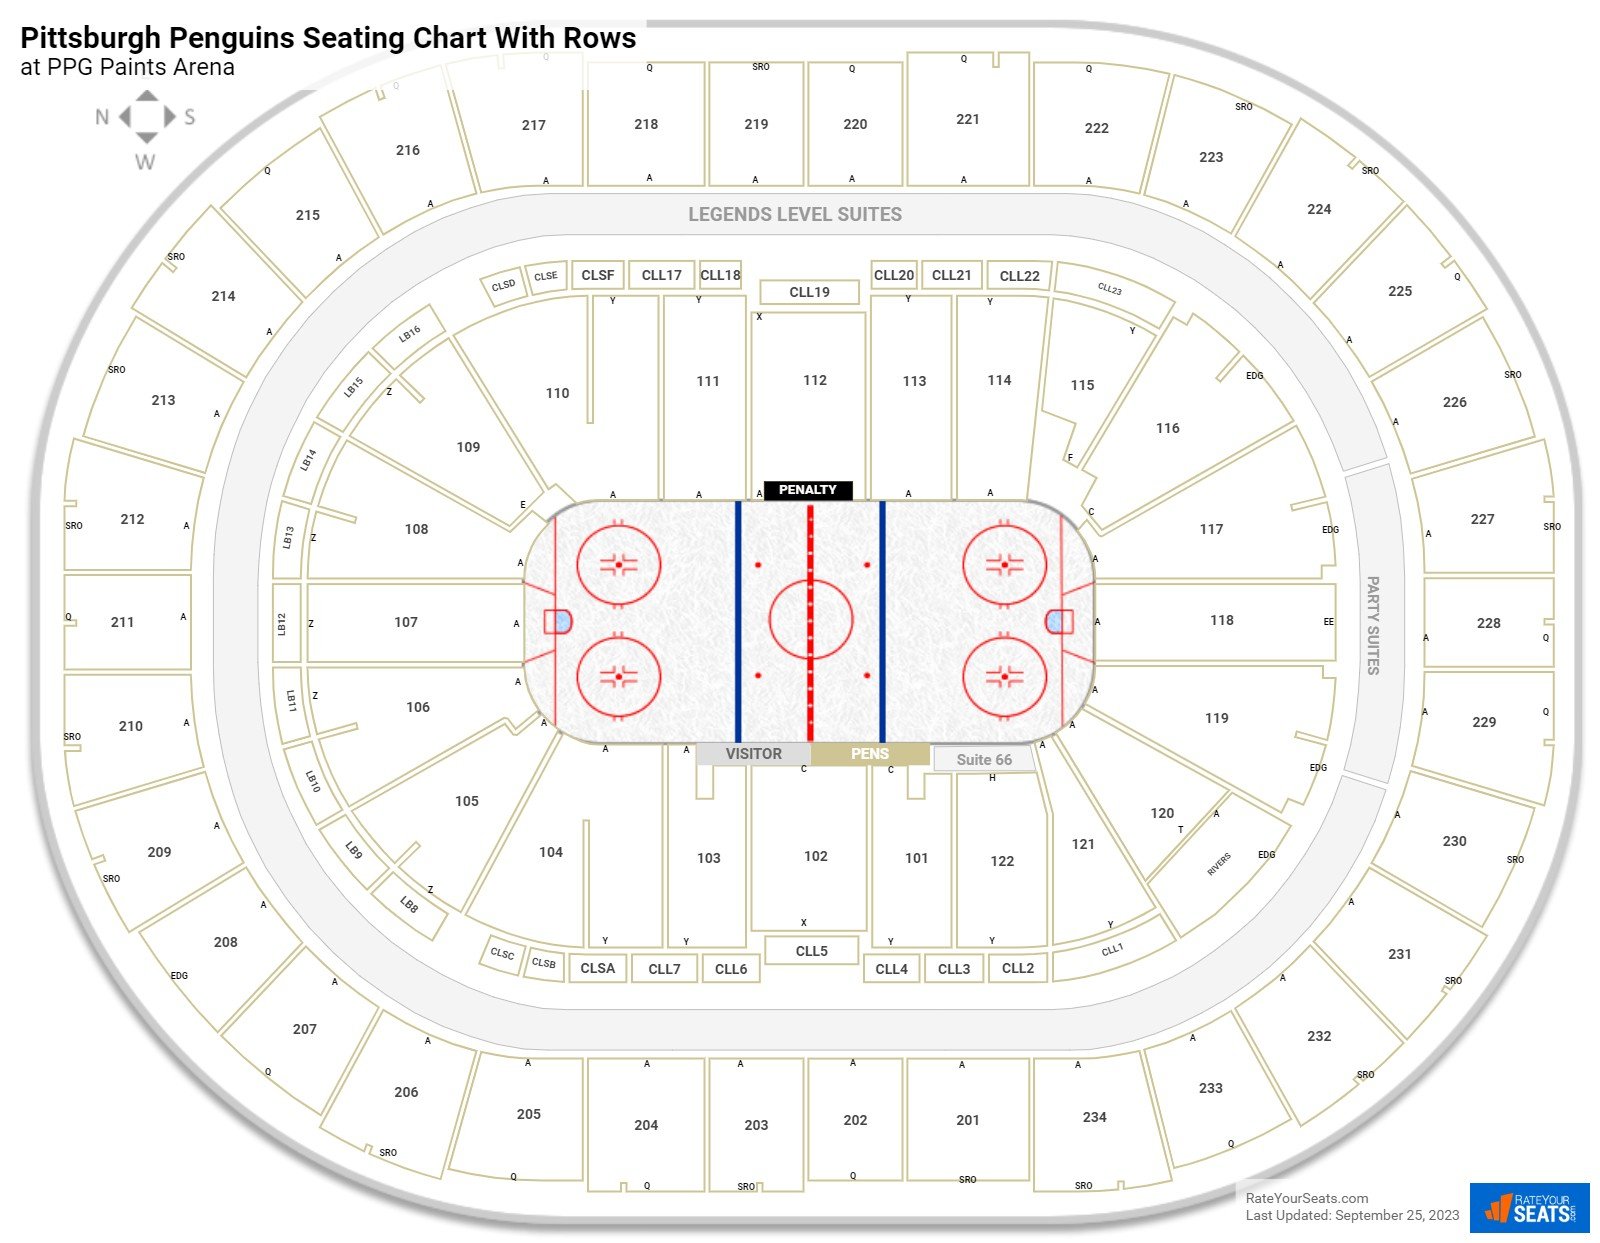 PPG Paints Arena Seating 